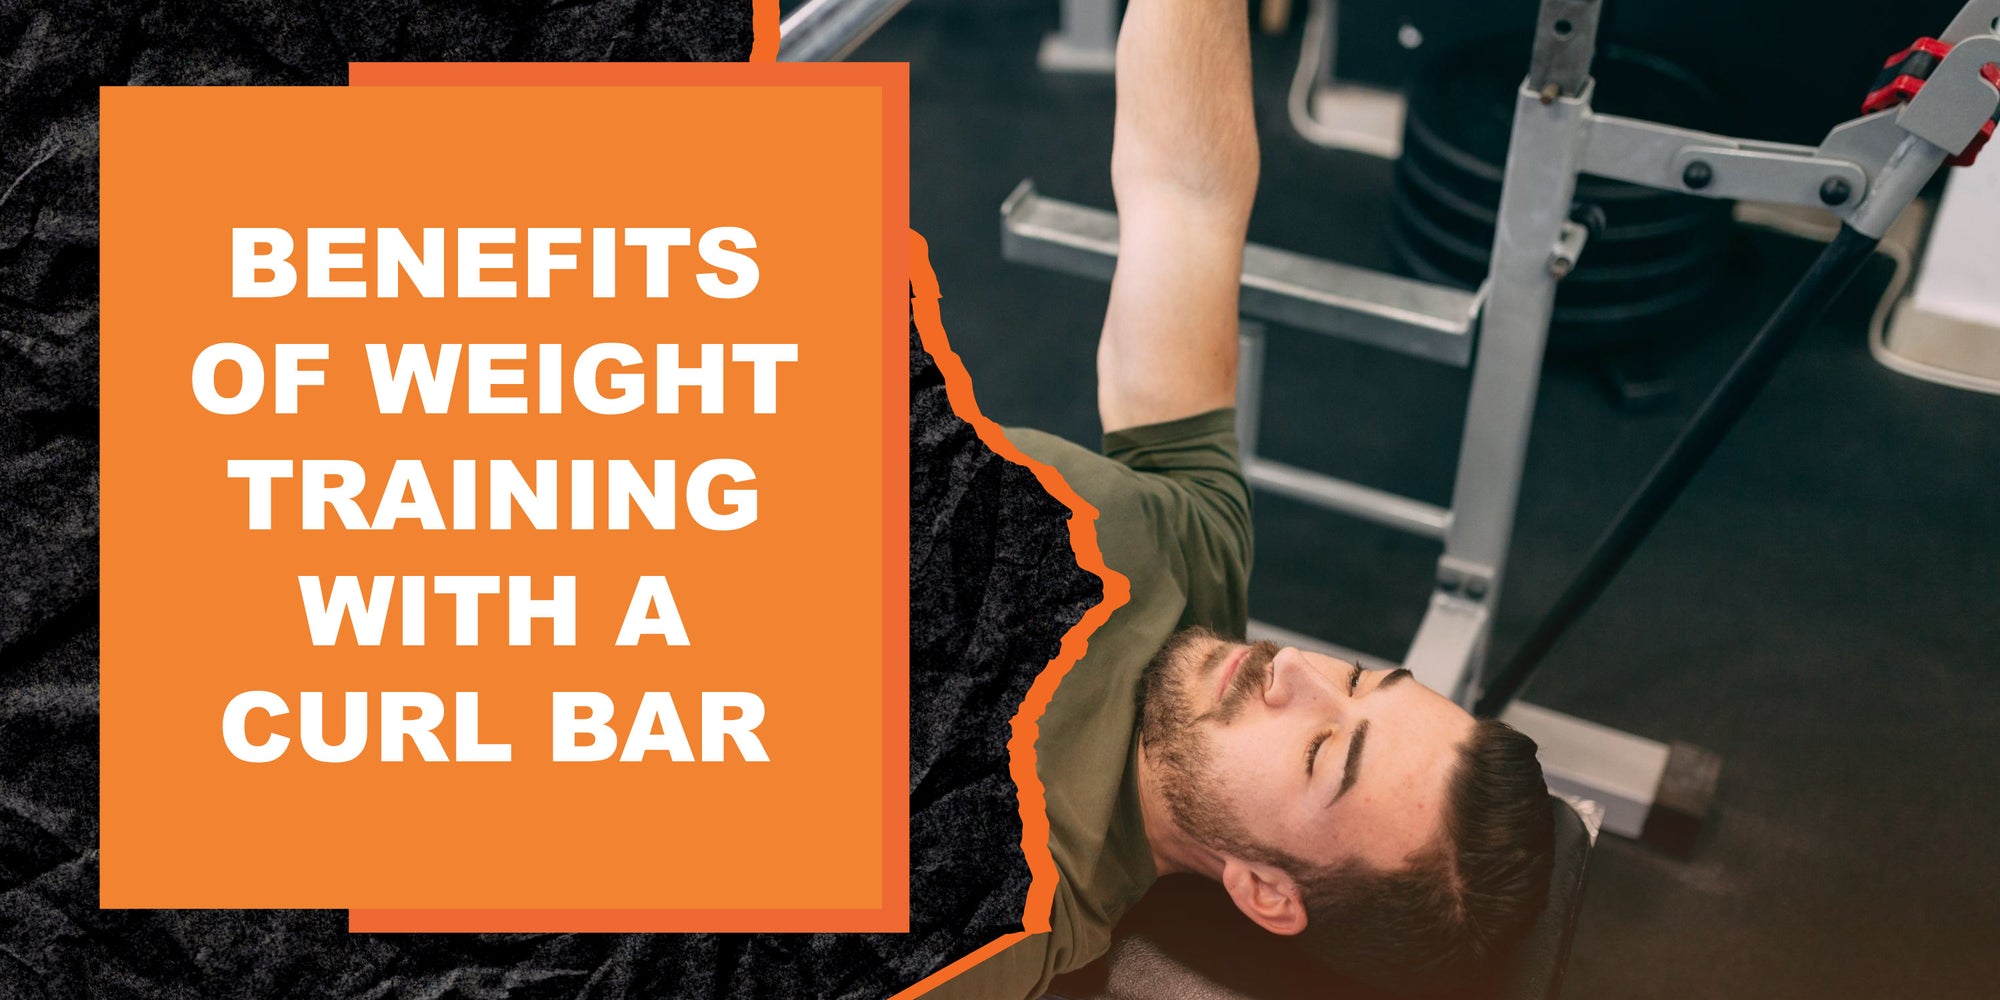 Benefits of Weight Training with a Curl Bar